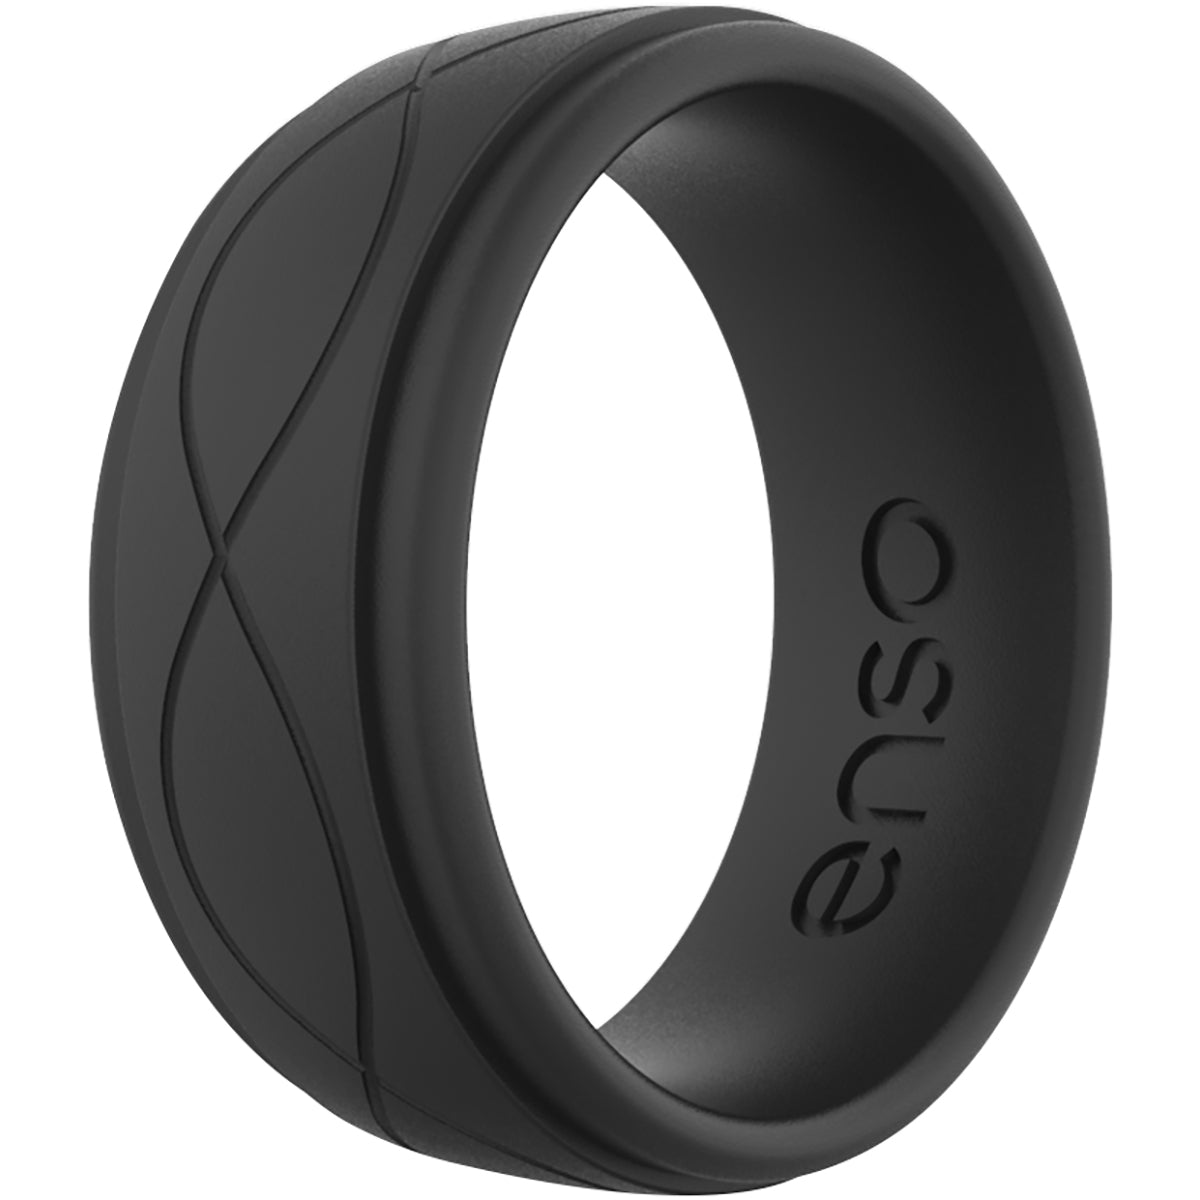 Enso Rings Men's Infinity Series Silicone Ring -  Obsidian Enso Rings